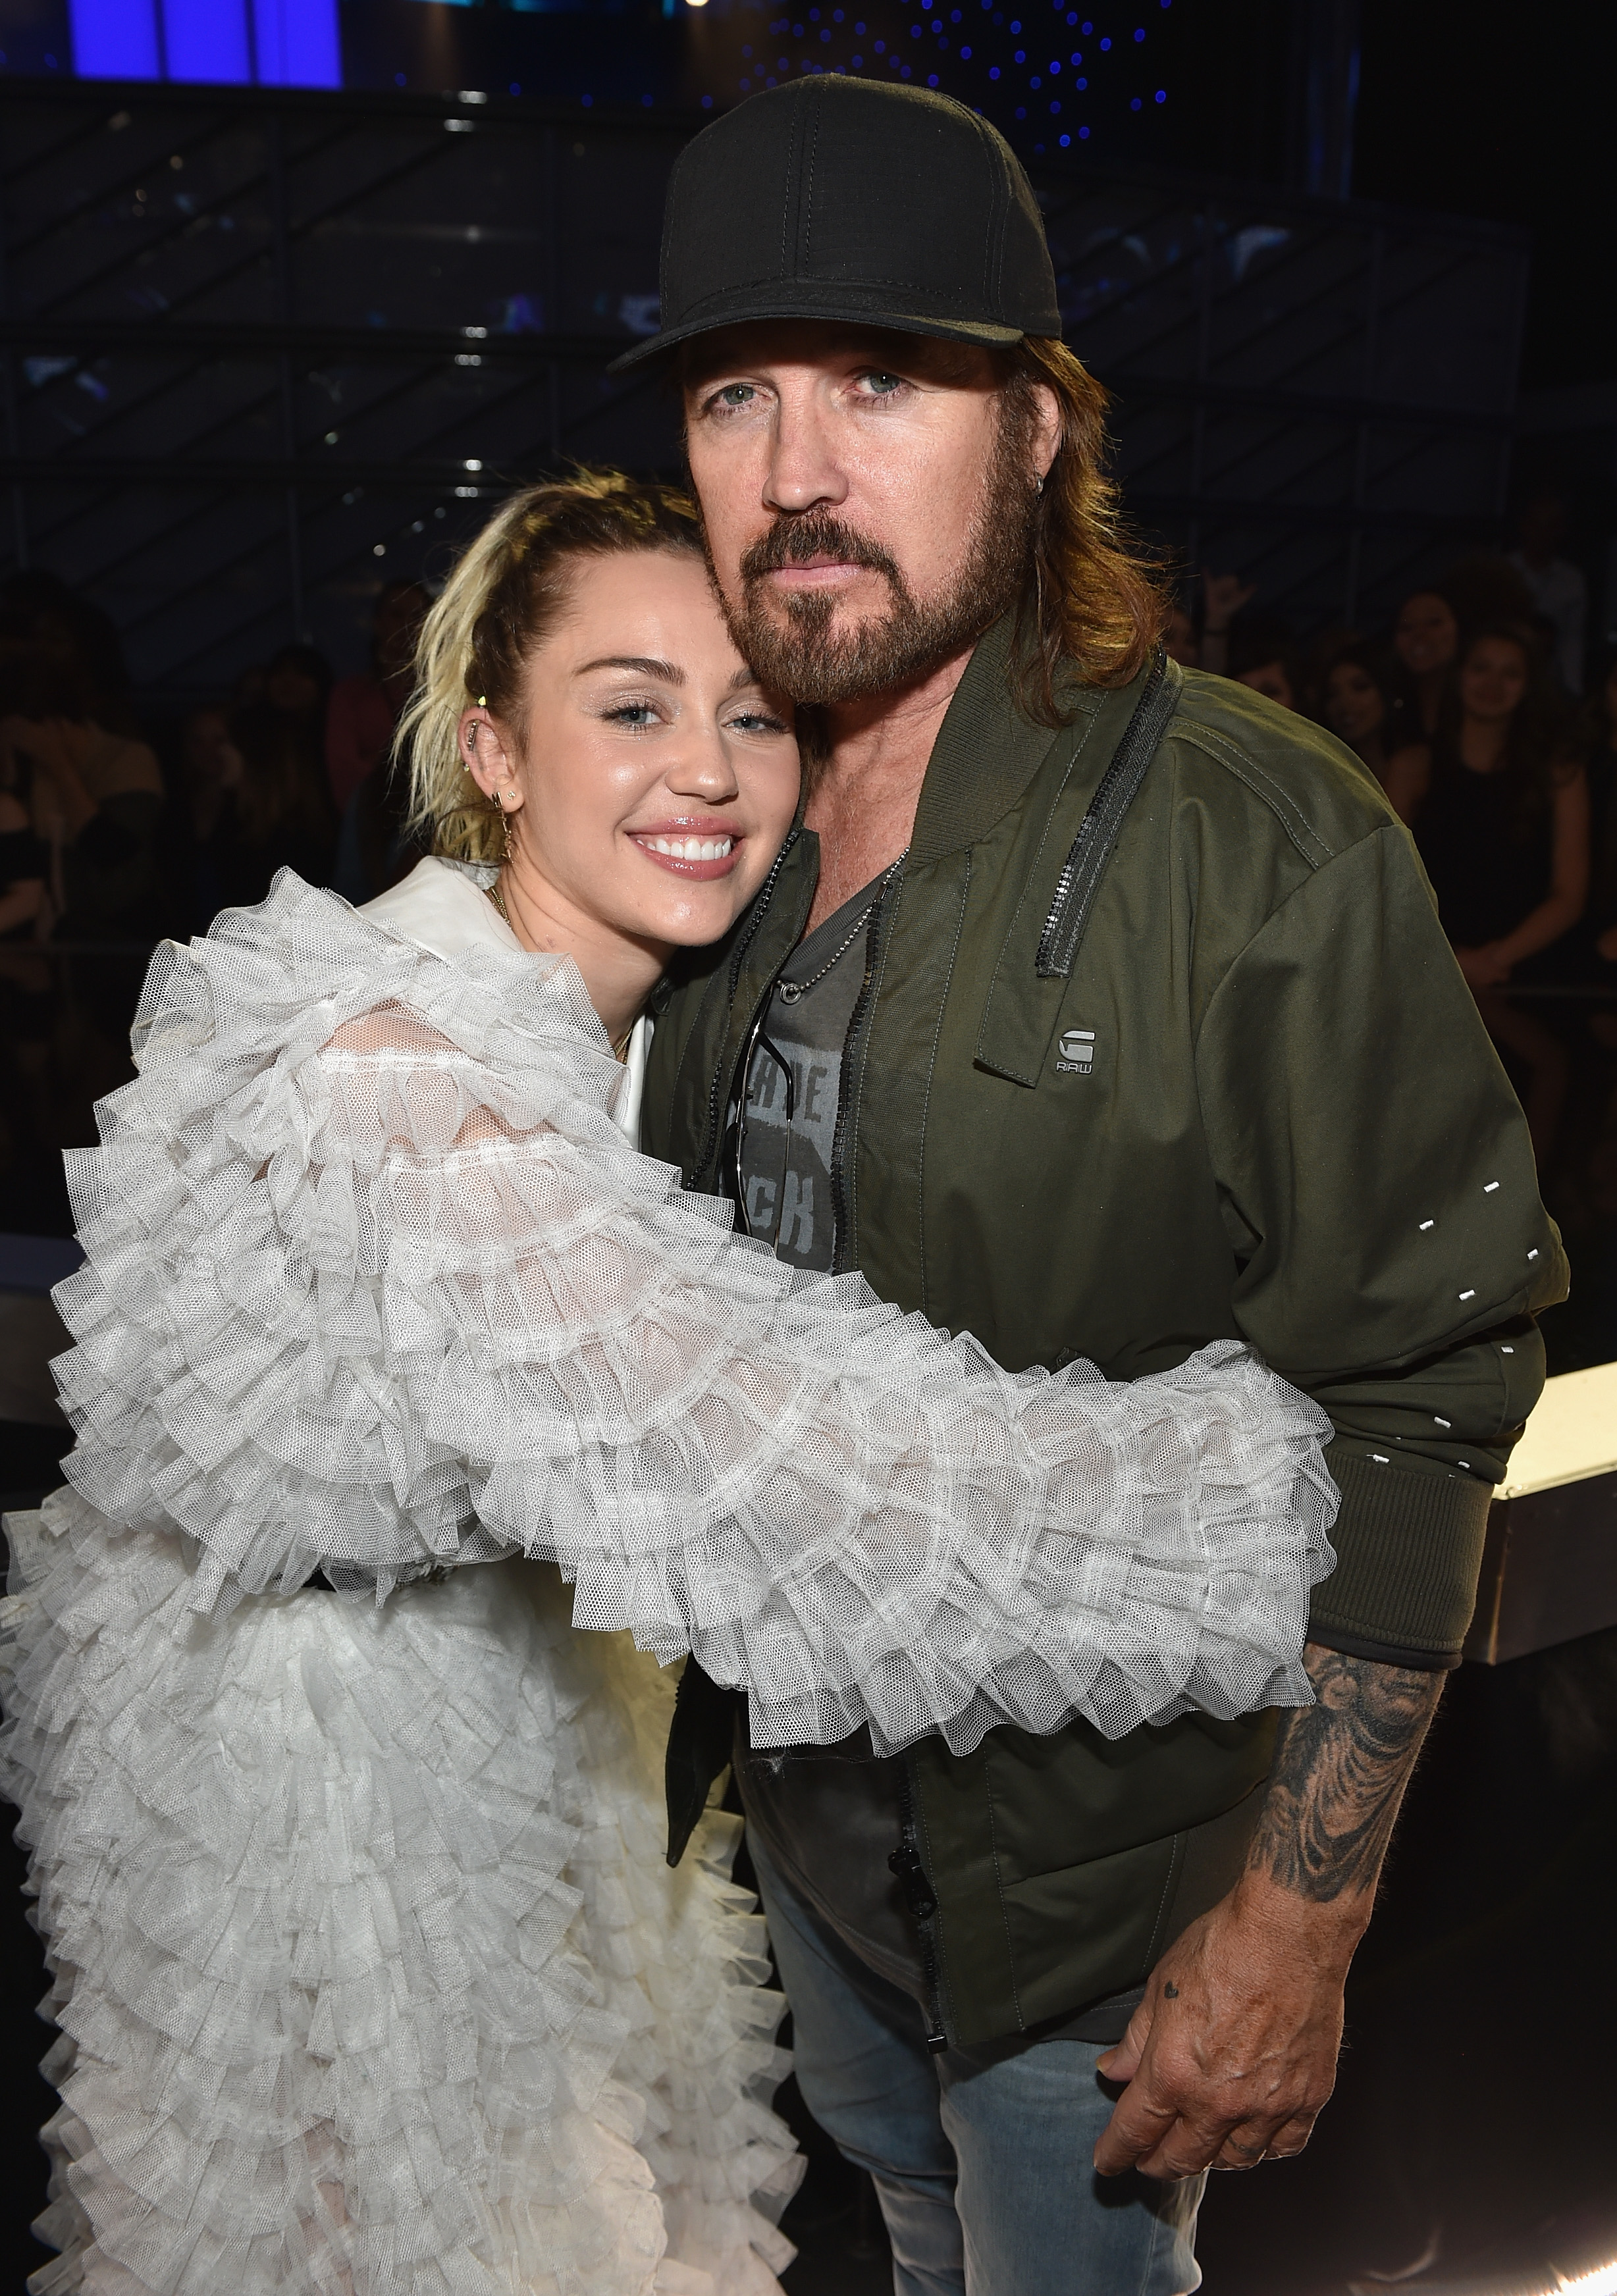 Miley thinks that her dad's divorce will bring peace to the family and is a step in the right direction for Billy Ray